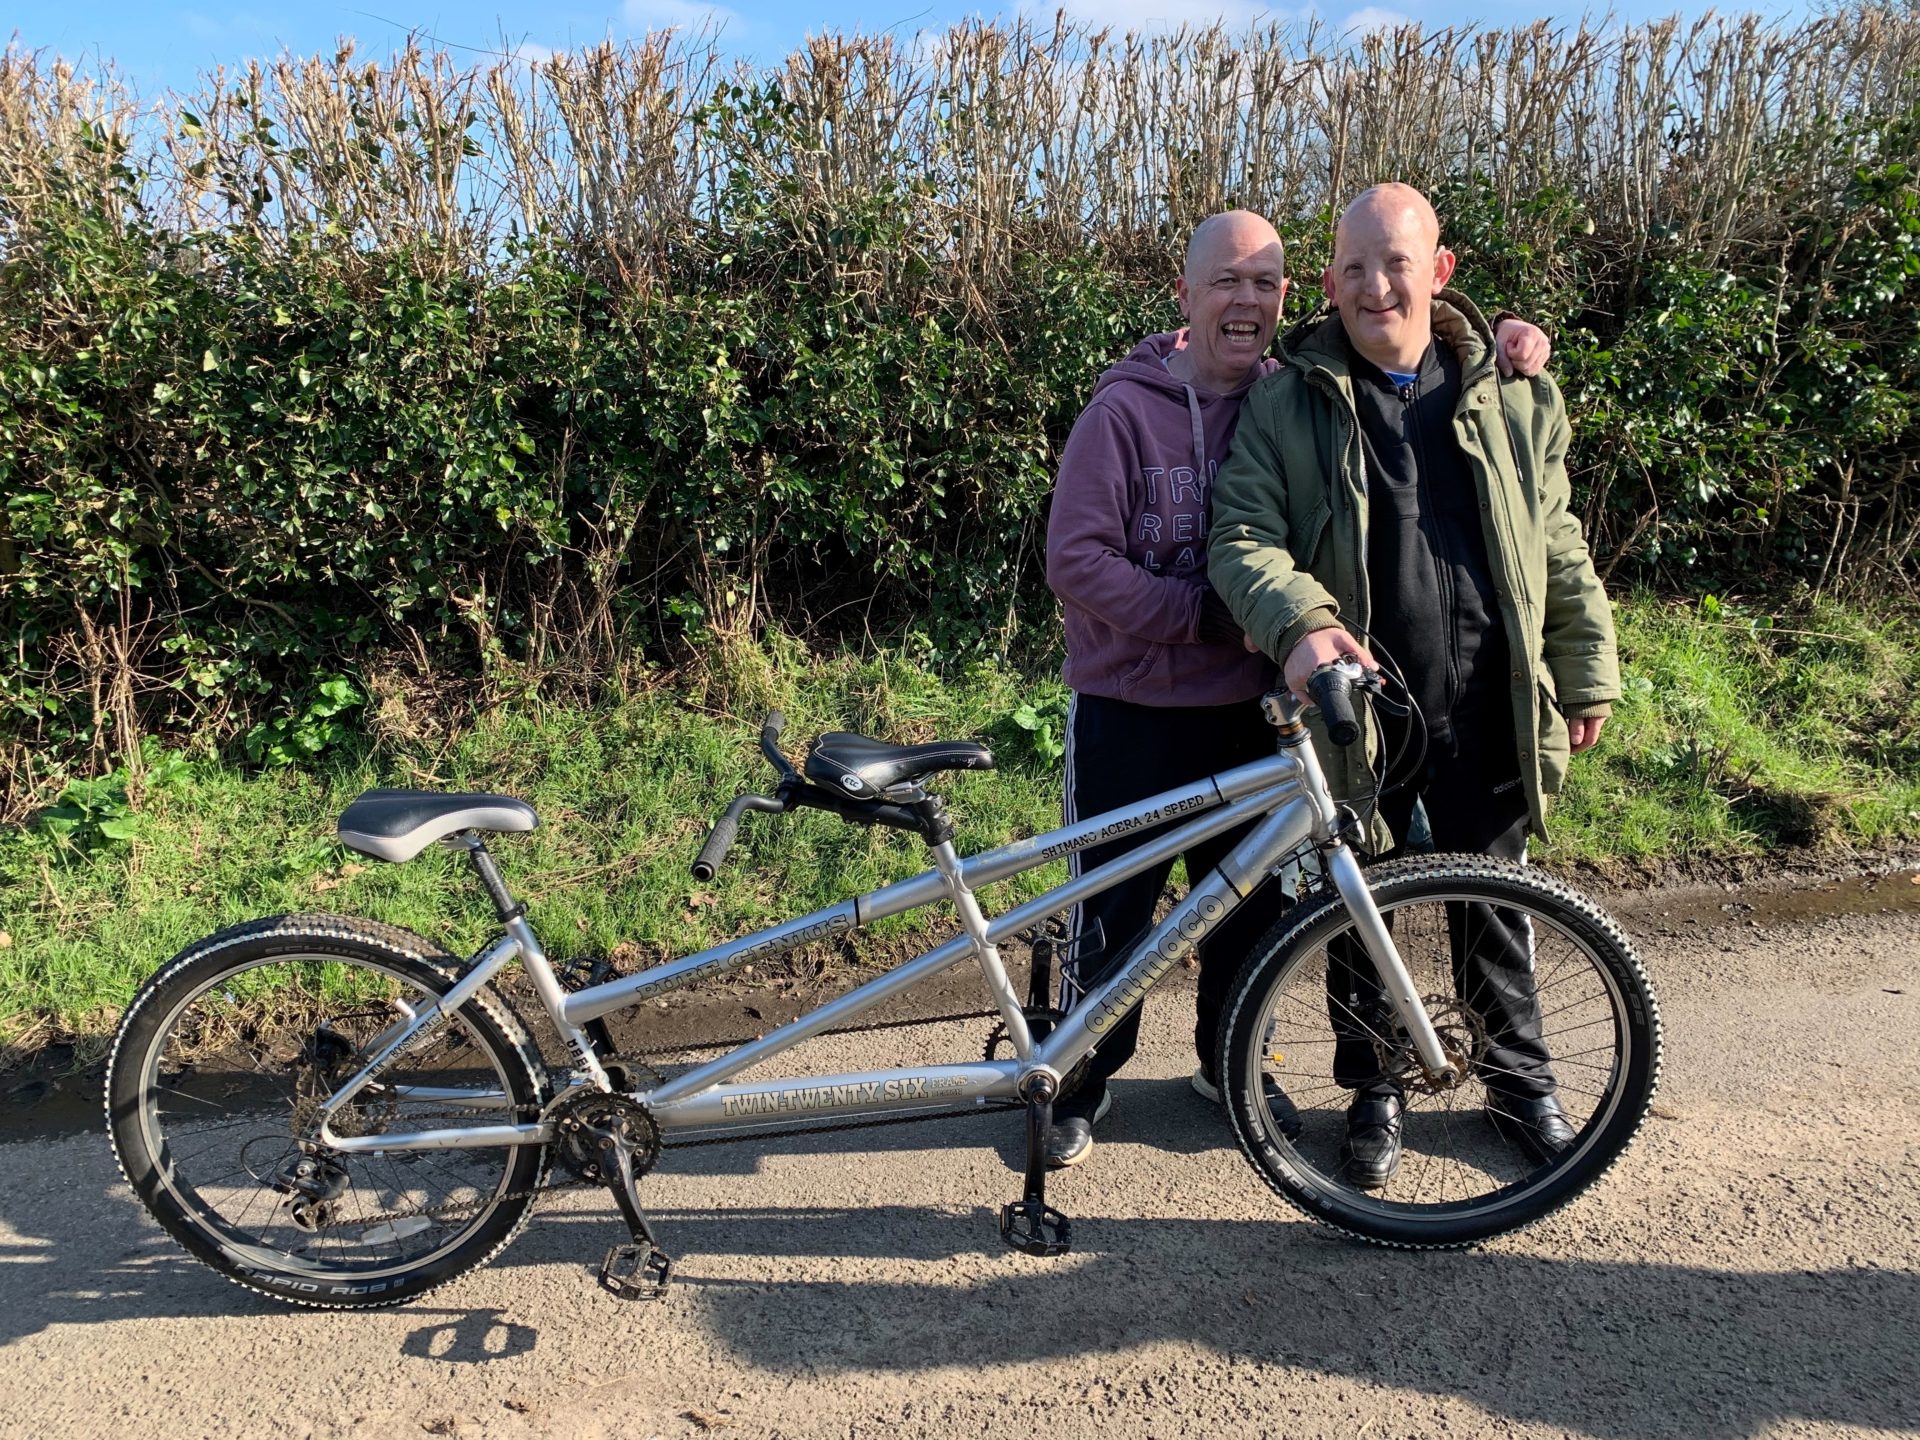 Paul and Lee standing next to each other in front of their tandem bike.